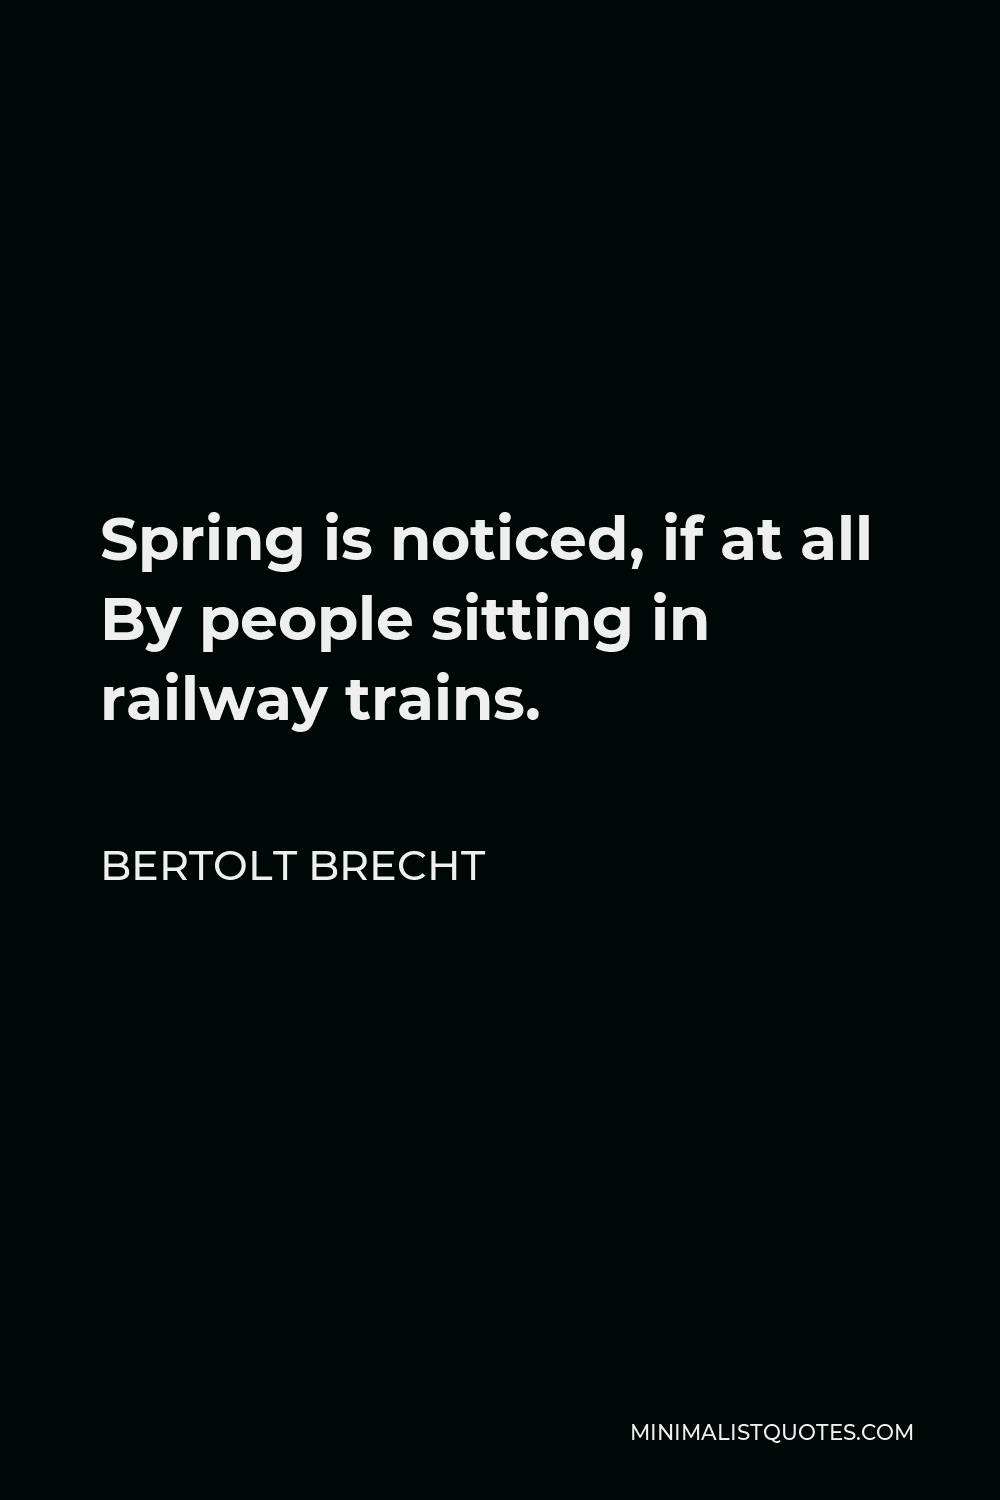 Bertolt Brecht Quote - Spring is noticed, if at all By people sitting in railway trains.